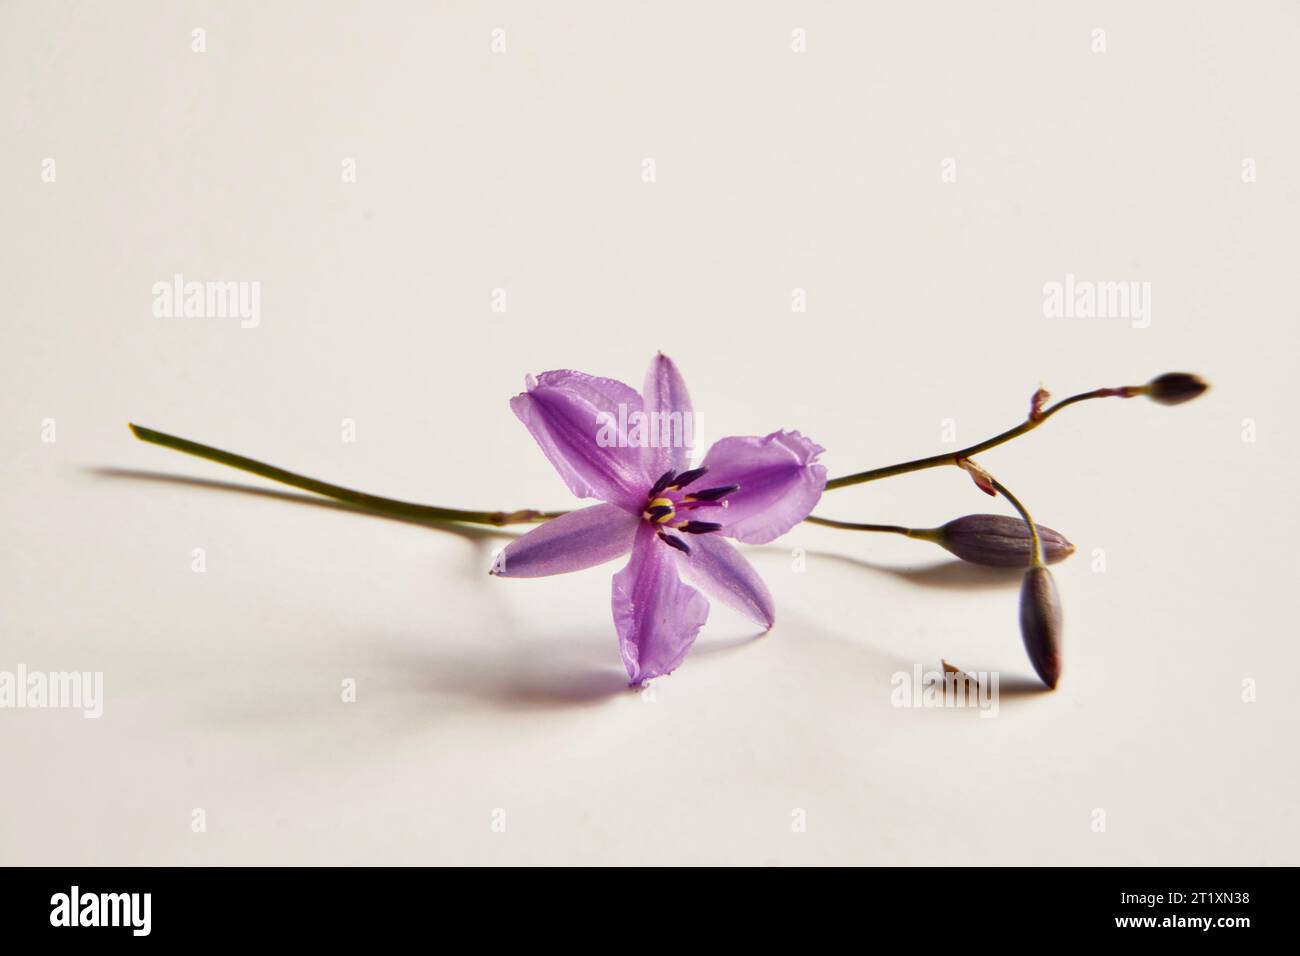 Close up of the Blue-violet flower of Arthropodium strictum or the Chocolate Lily on a white background. Stock Photo